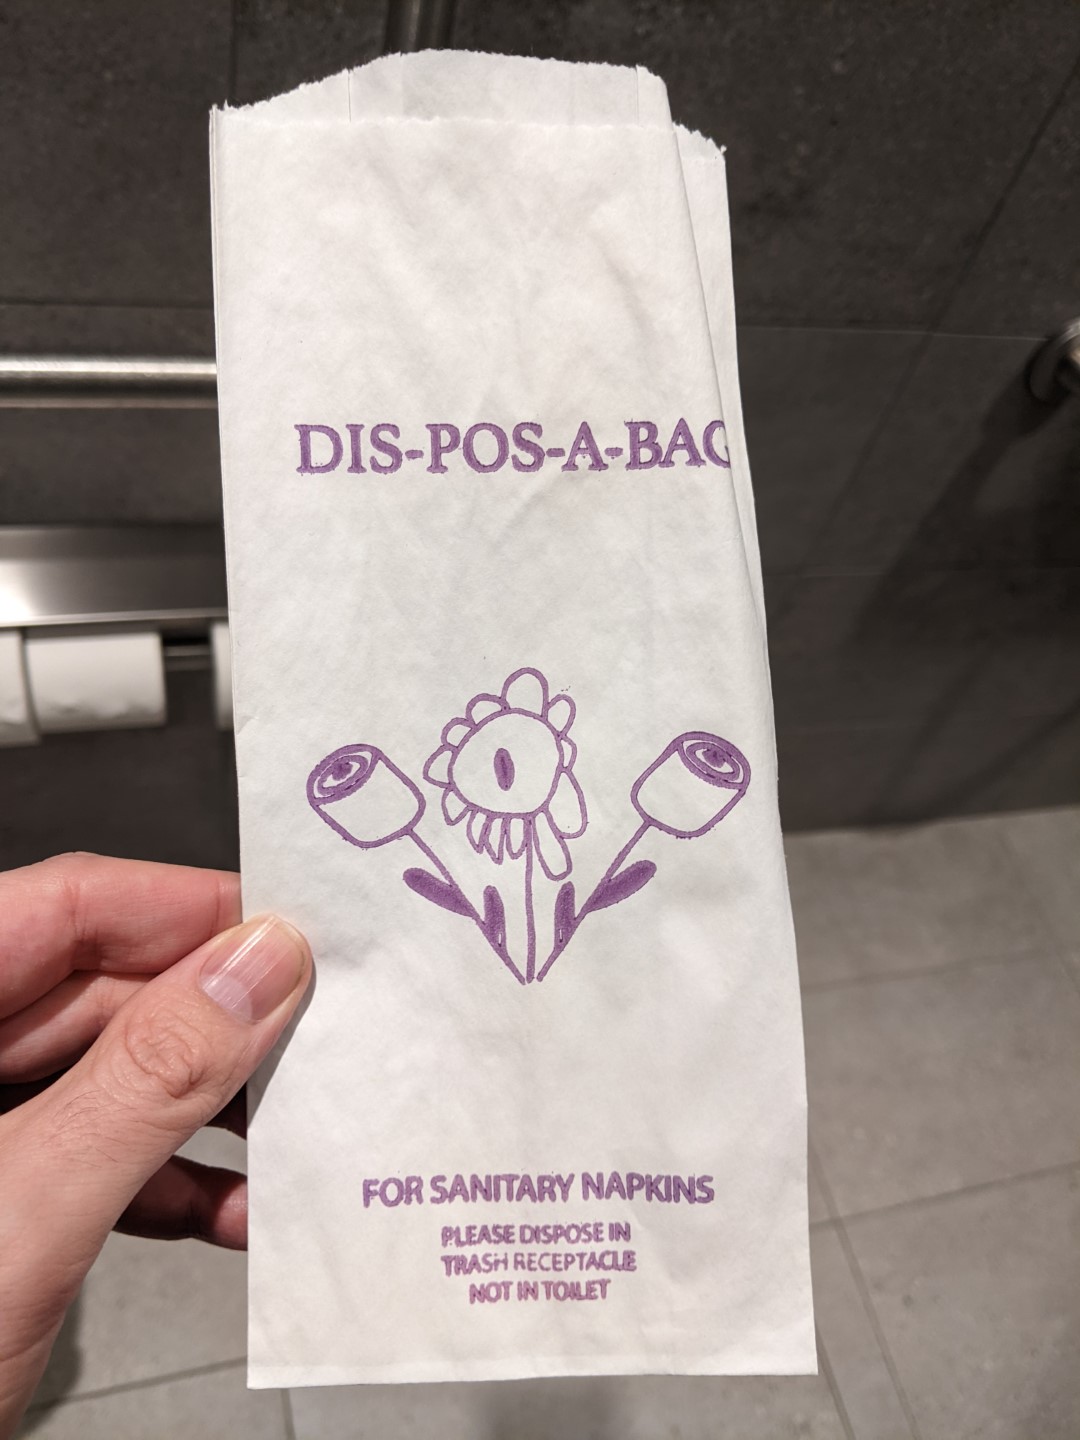 Close up of a paper bag with purple printing on it. It says Dis-pos-a-bag and has an image of a flower and two rolls of toilet paper on stems.